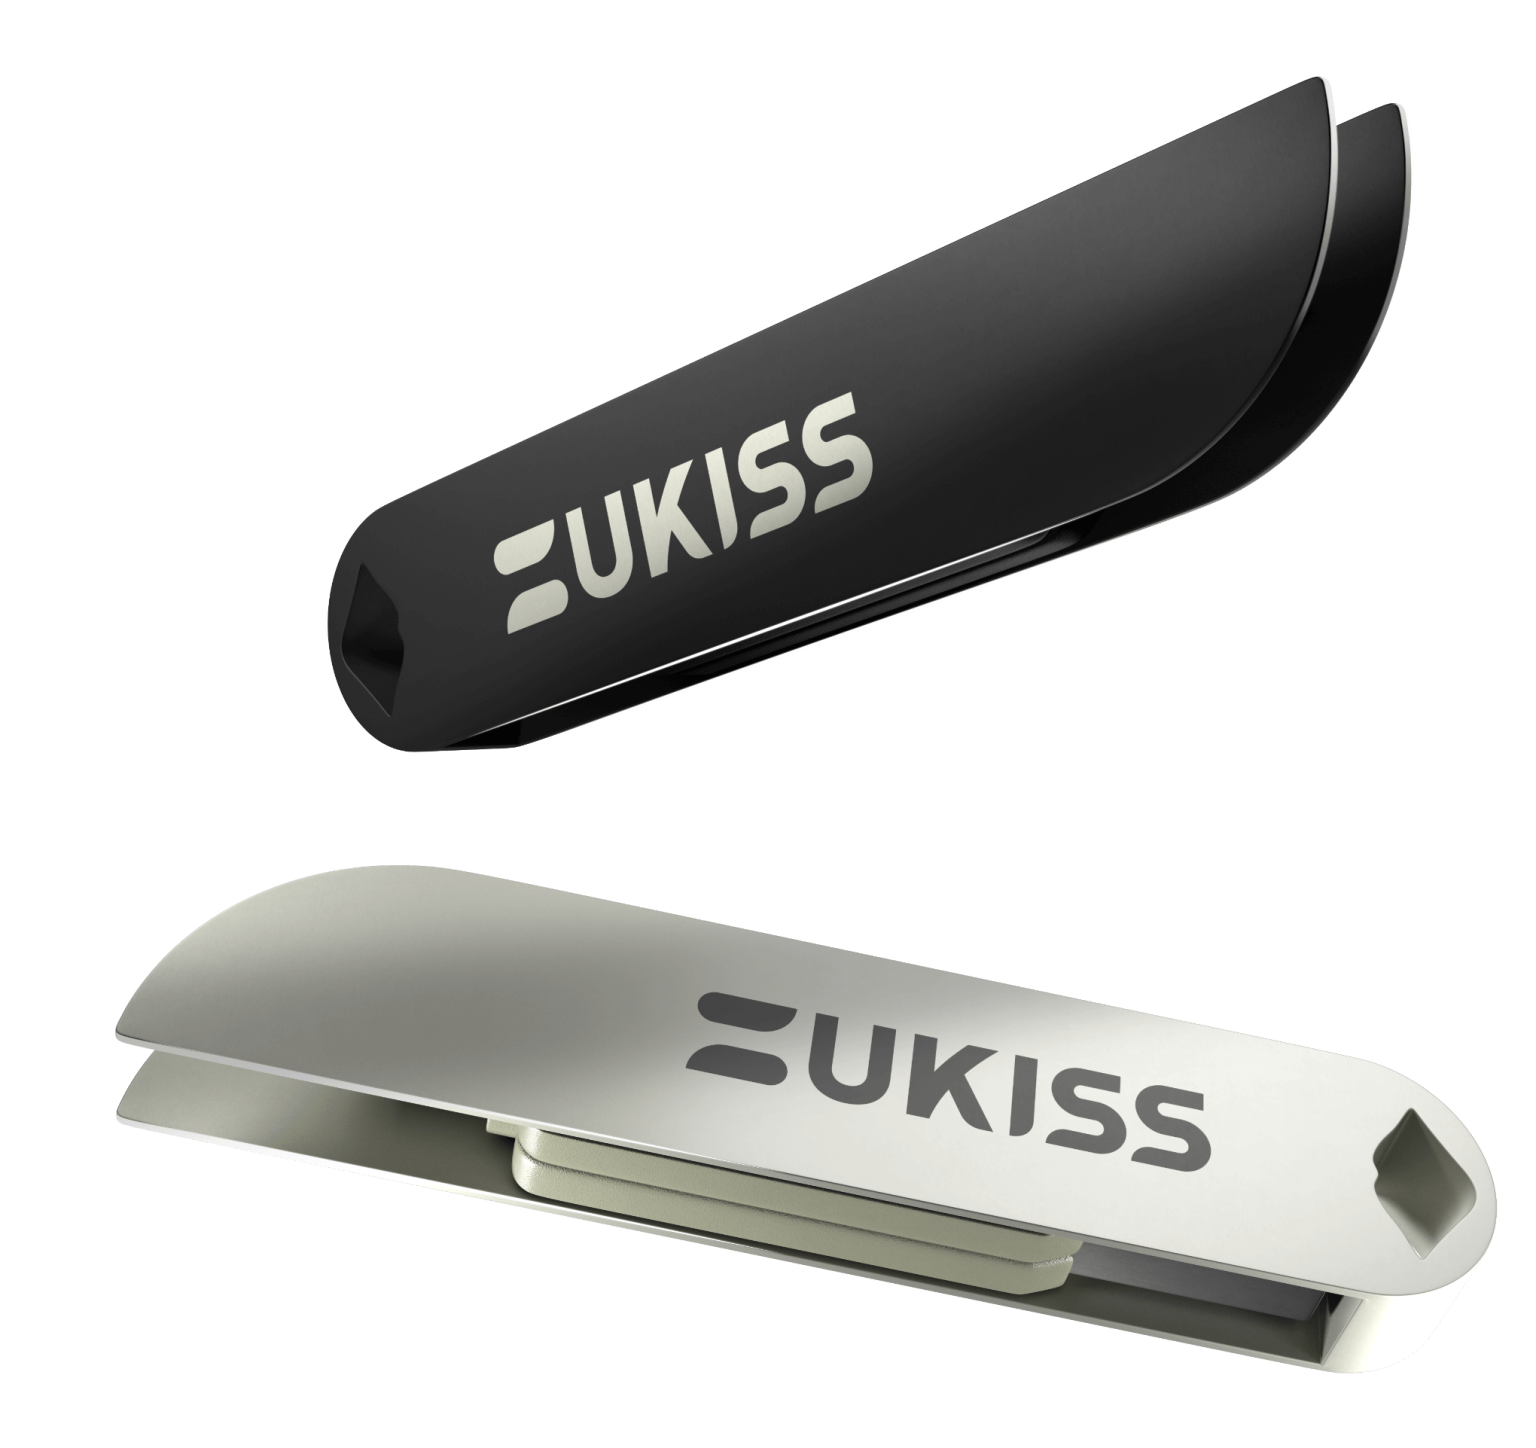 Singapore startup launches crypto hardware wallet to secure assets, UKISS Hugware